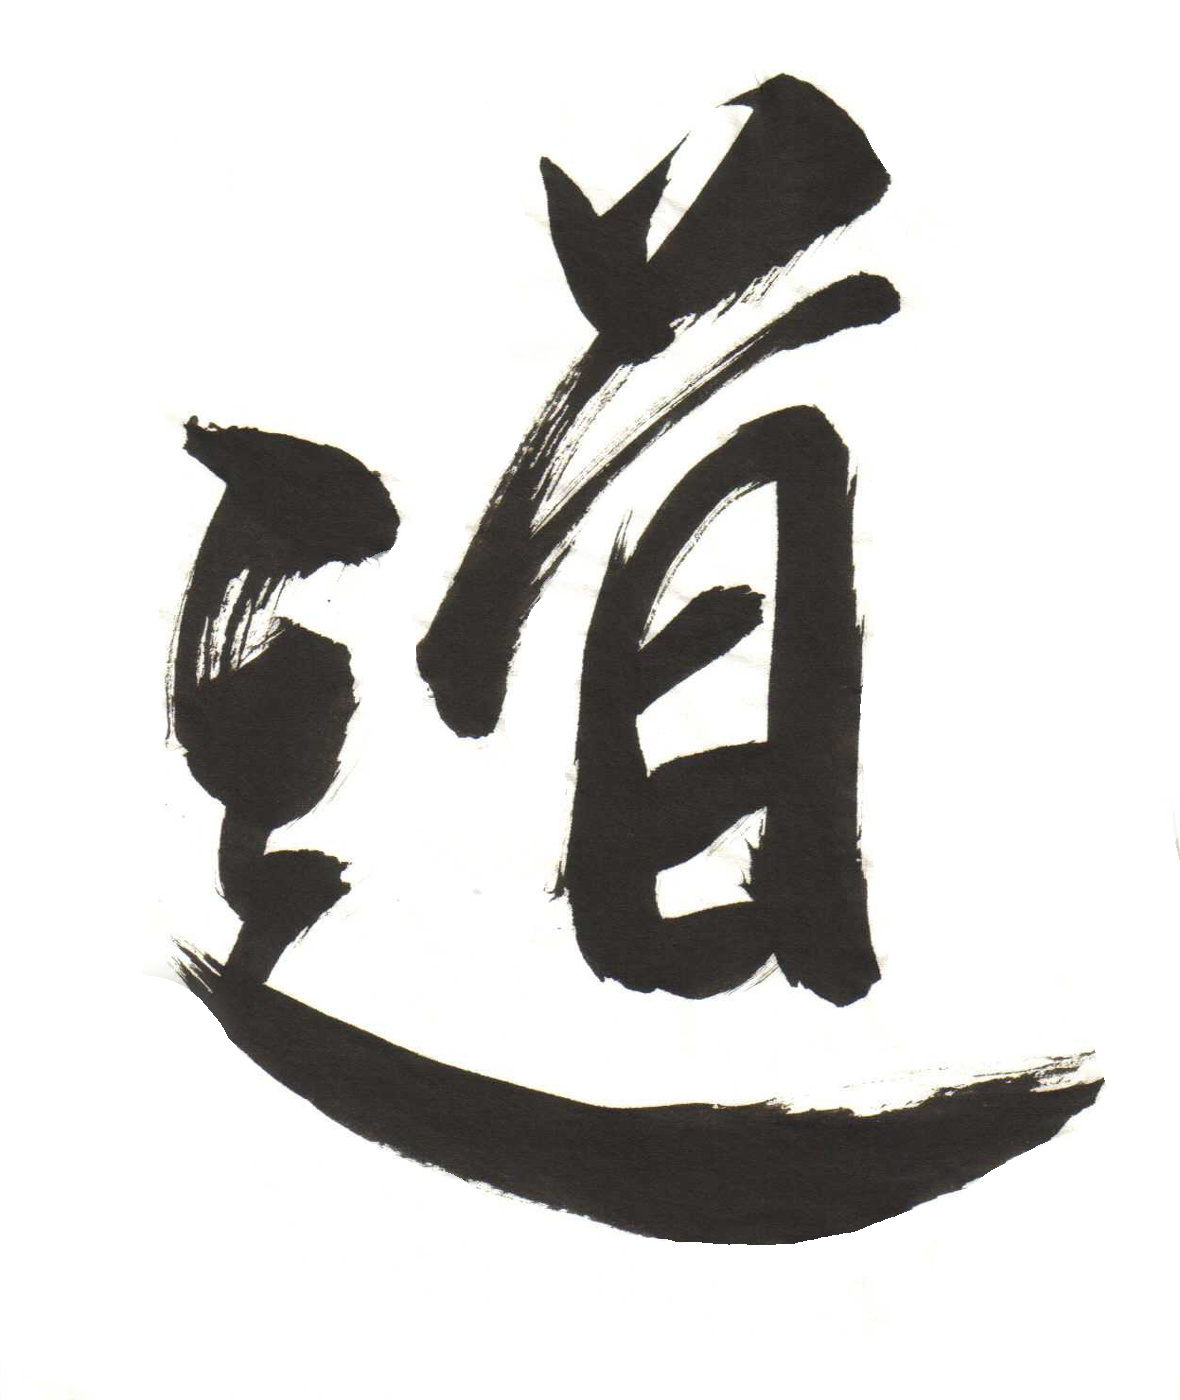 "Tao" Chinese calligraphy by Kerrie Redgate